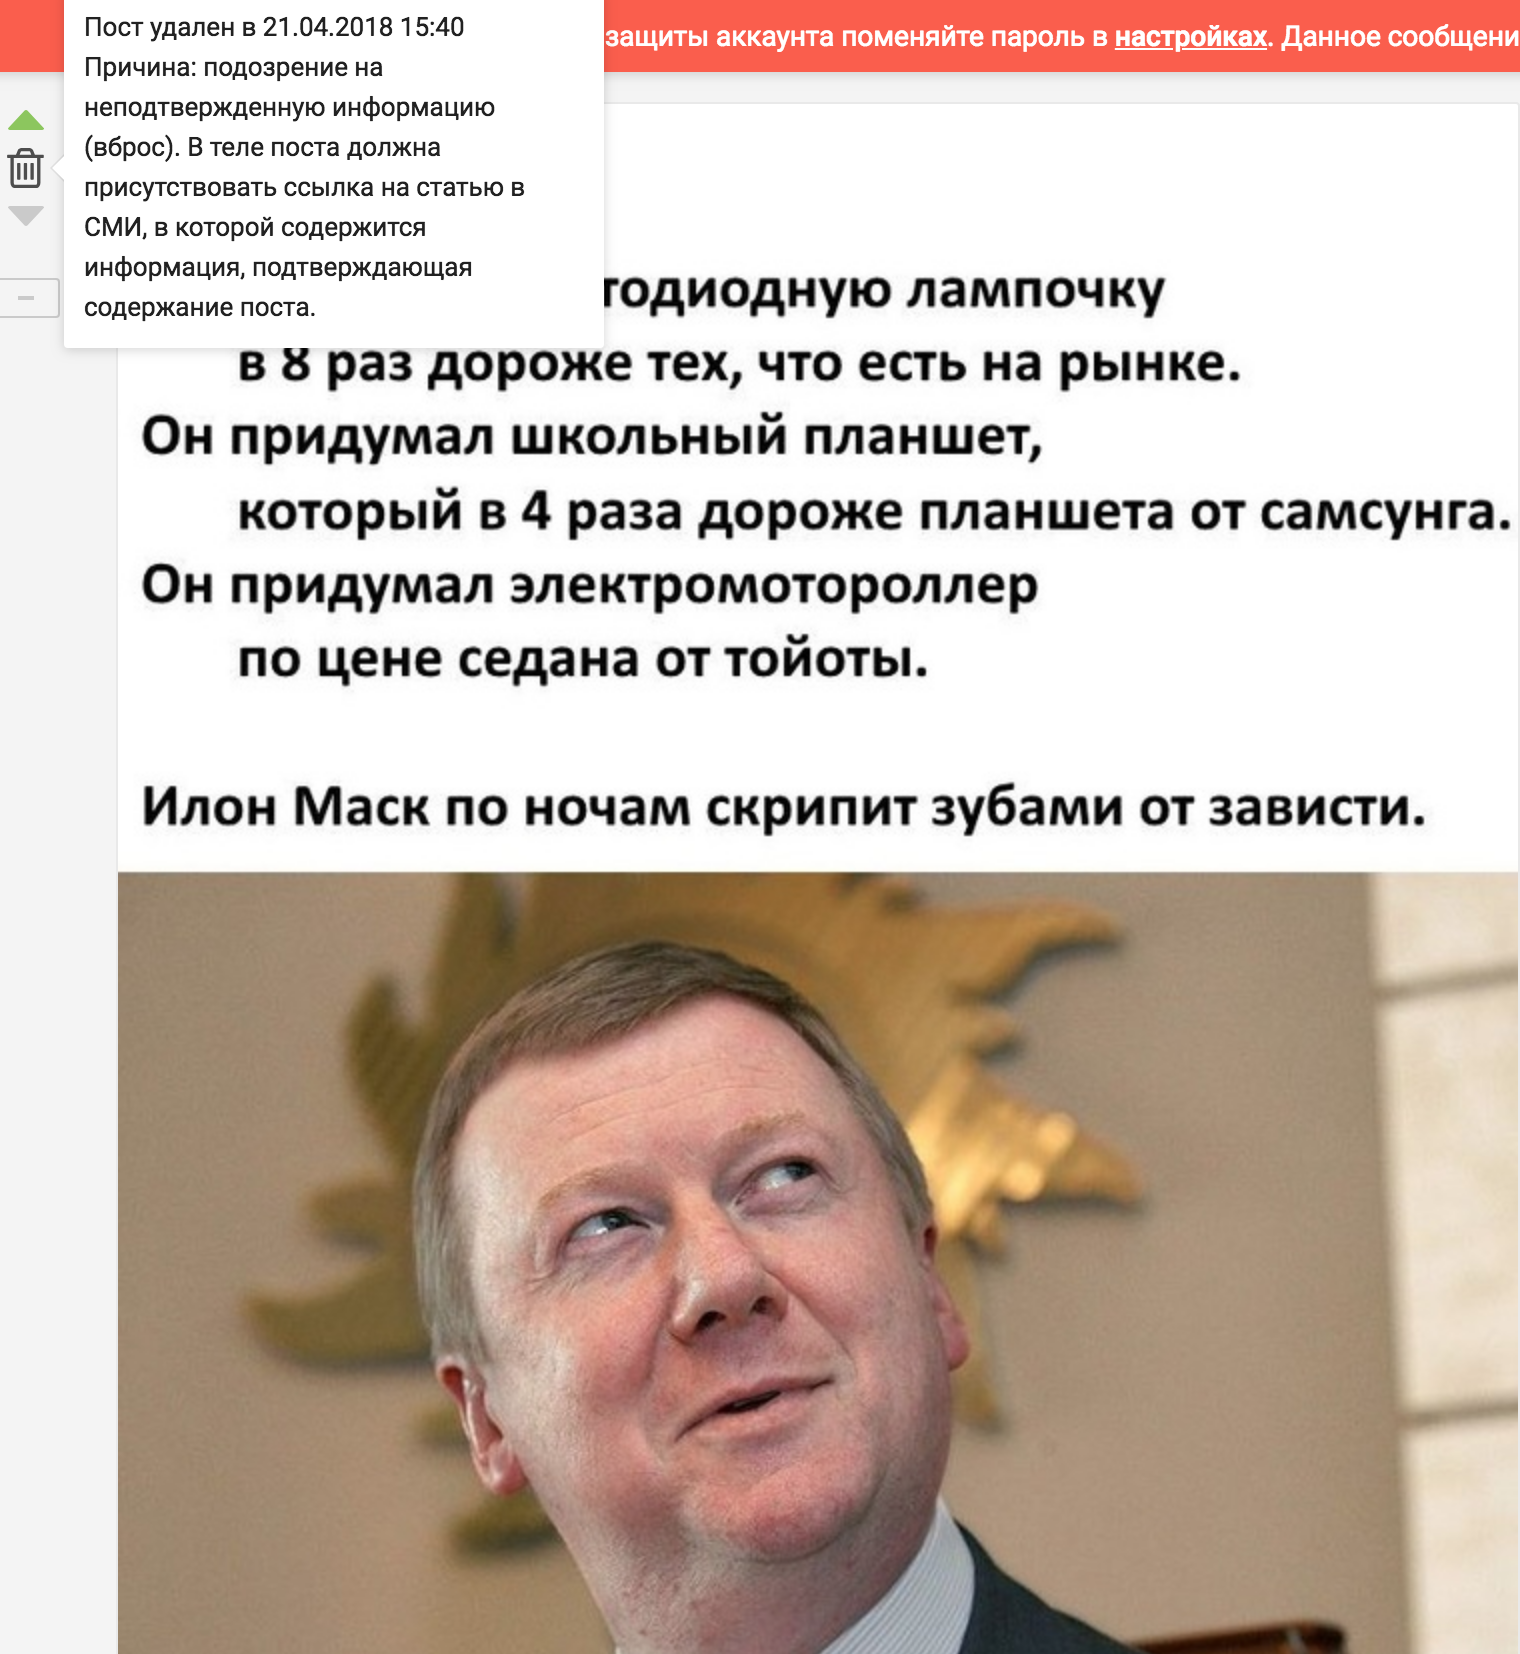 Why was the post about politics deleted? - Explanation, No rating, Chubais, Politics, Venality, Peekaboo